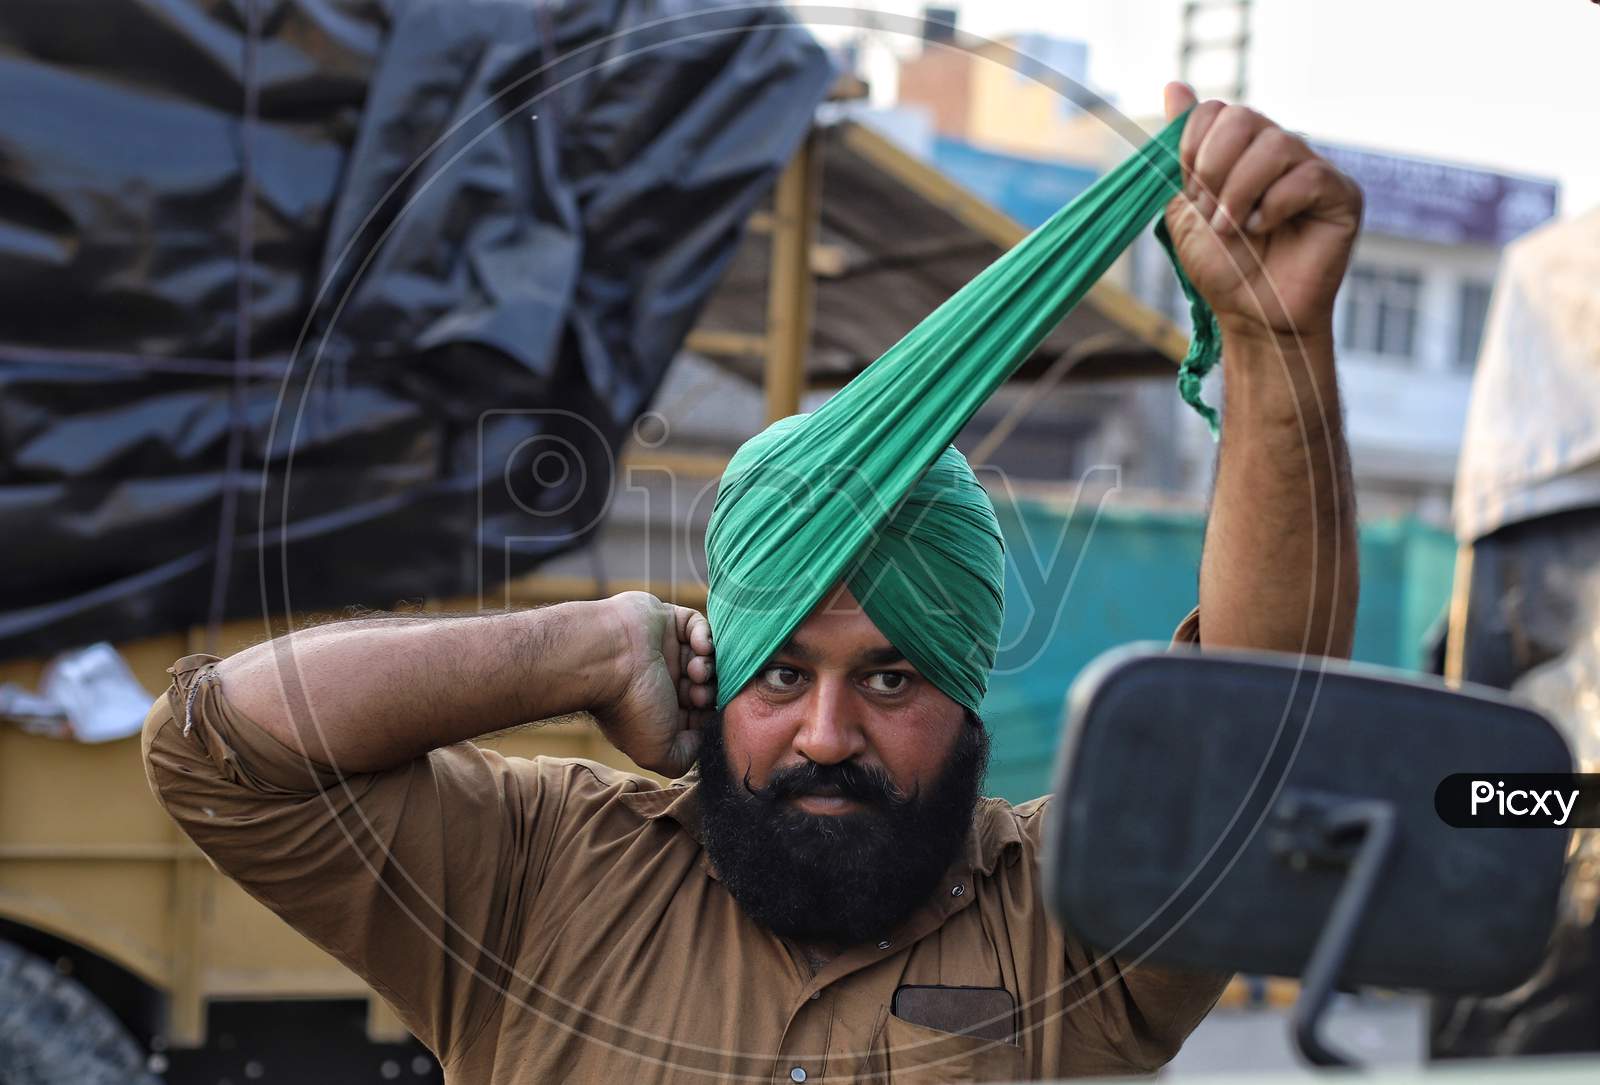 A Sikh farmer ties his turban during a farmers protest at Singhu Border. Thousands of farmers are protesting against  new farm laws at various entry points of New Delhi, India.